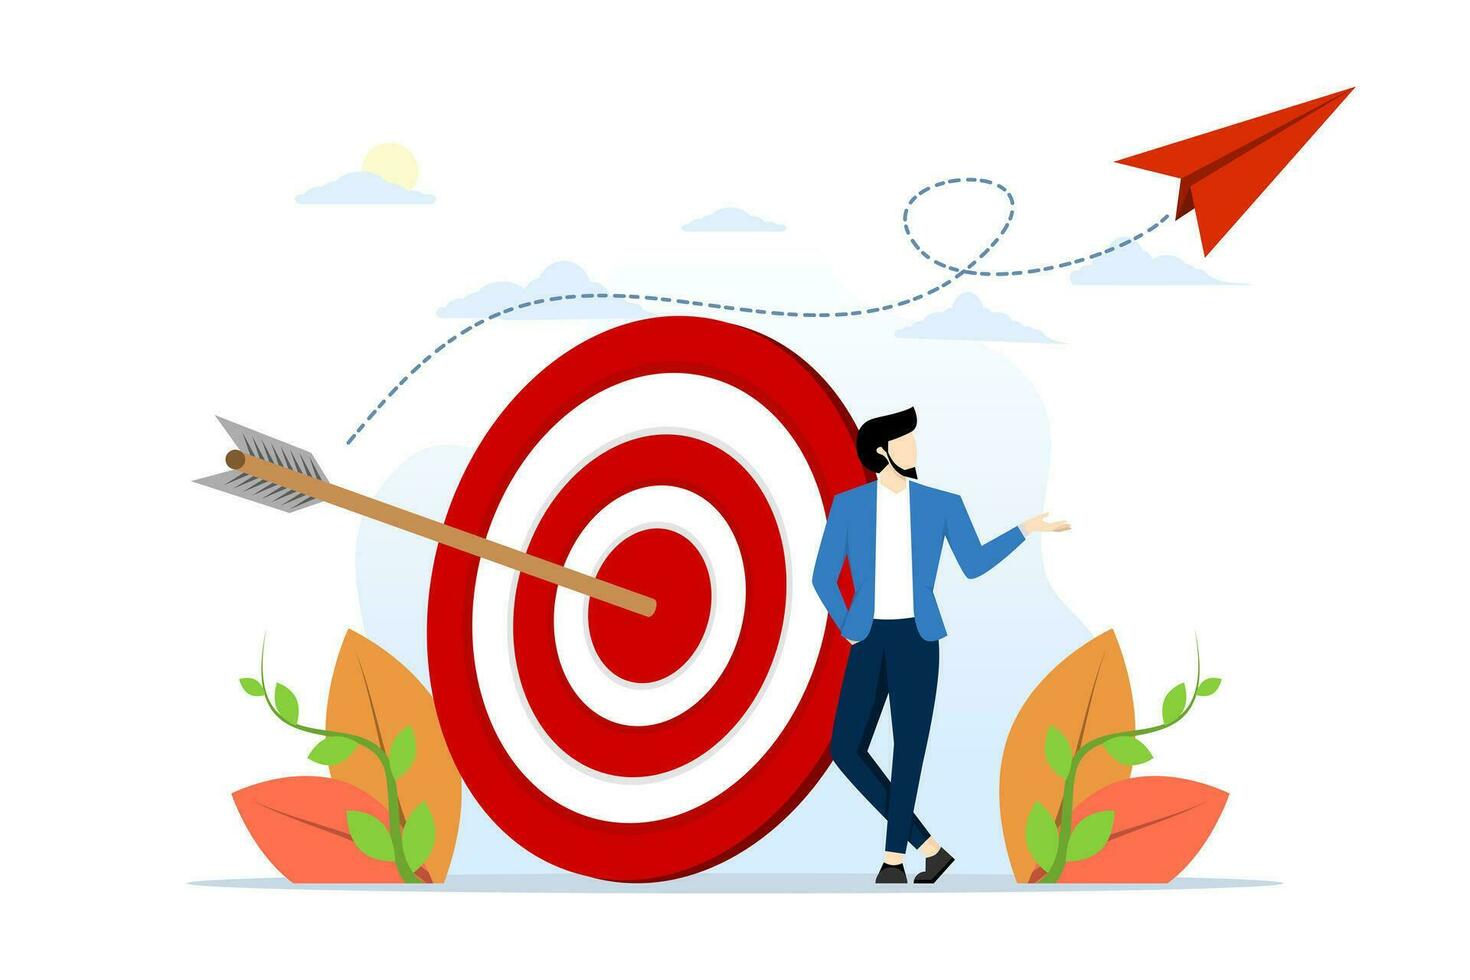 concept of business goal, aim or target, intent and resolution to achieve success, aspiration and motivation to achieve goal, confident businessman standing with arrow on target at archery target. vector